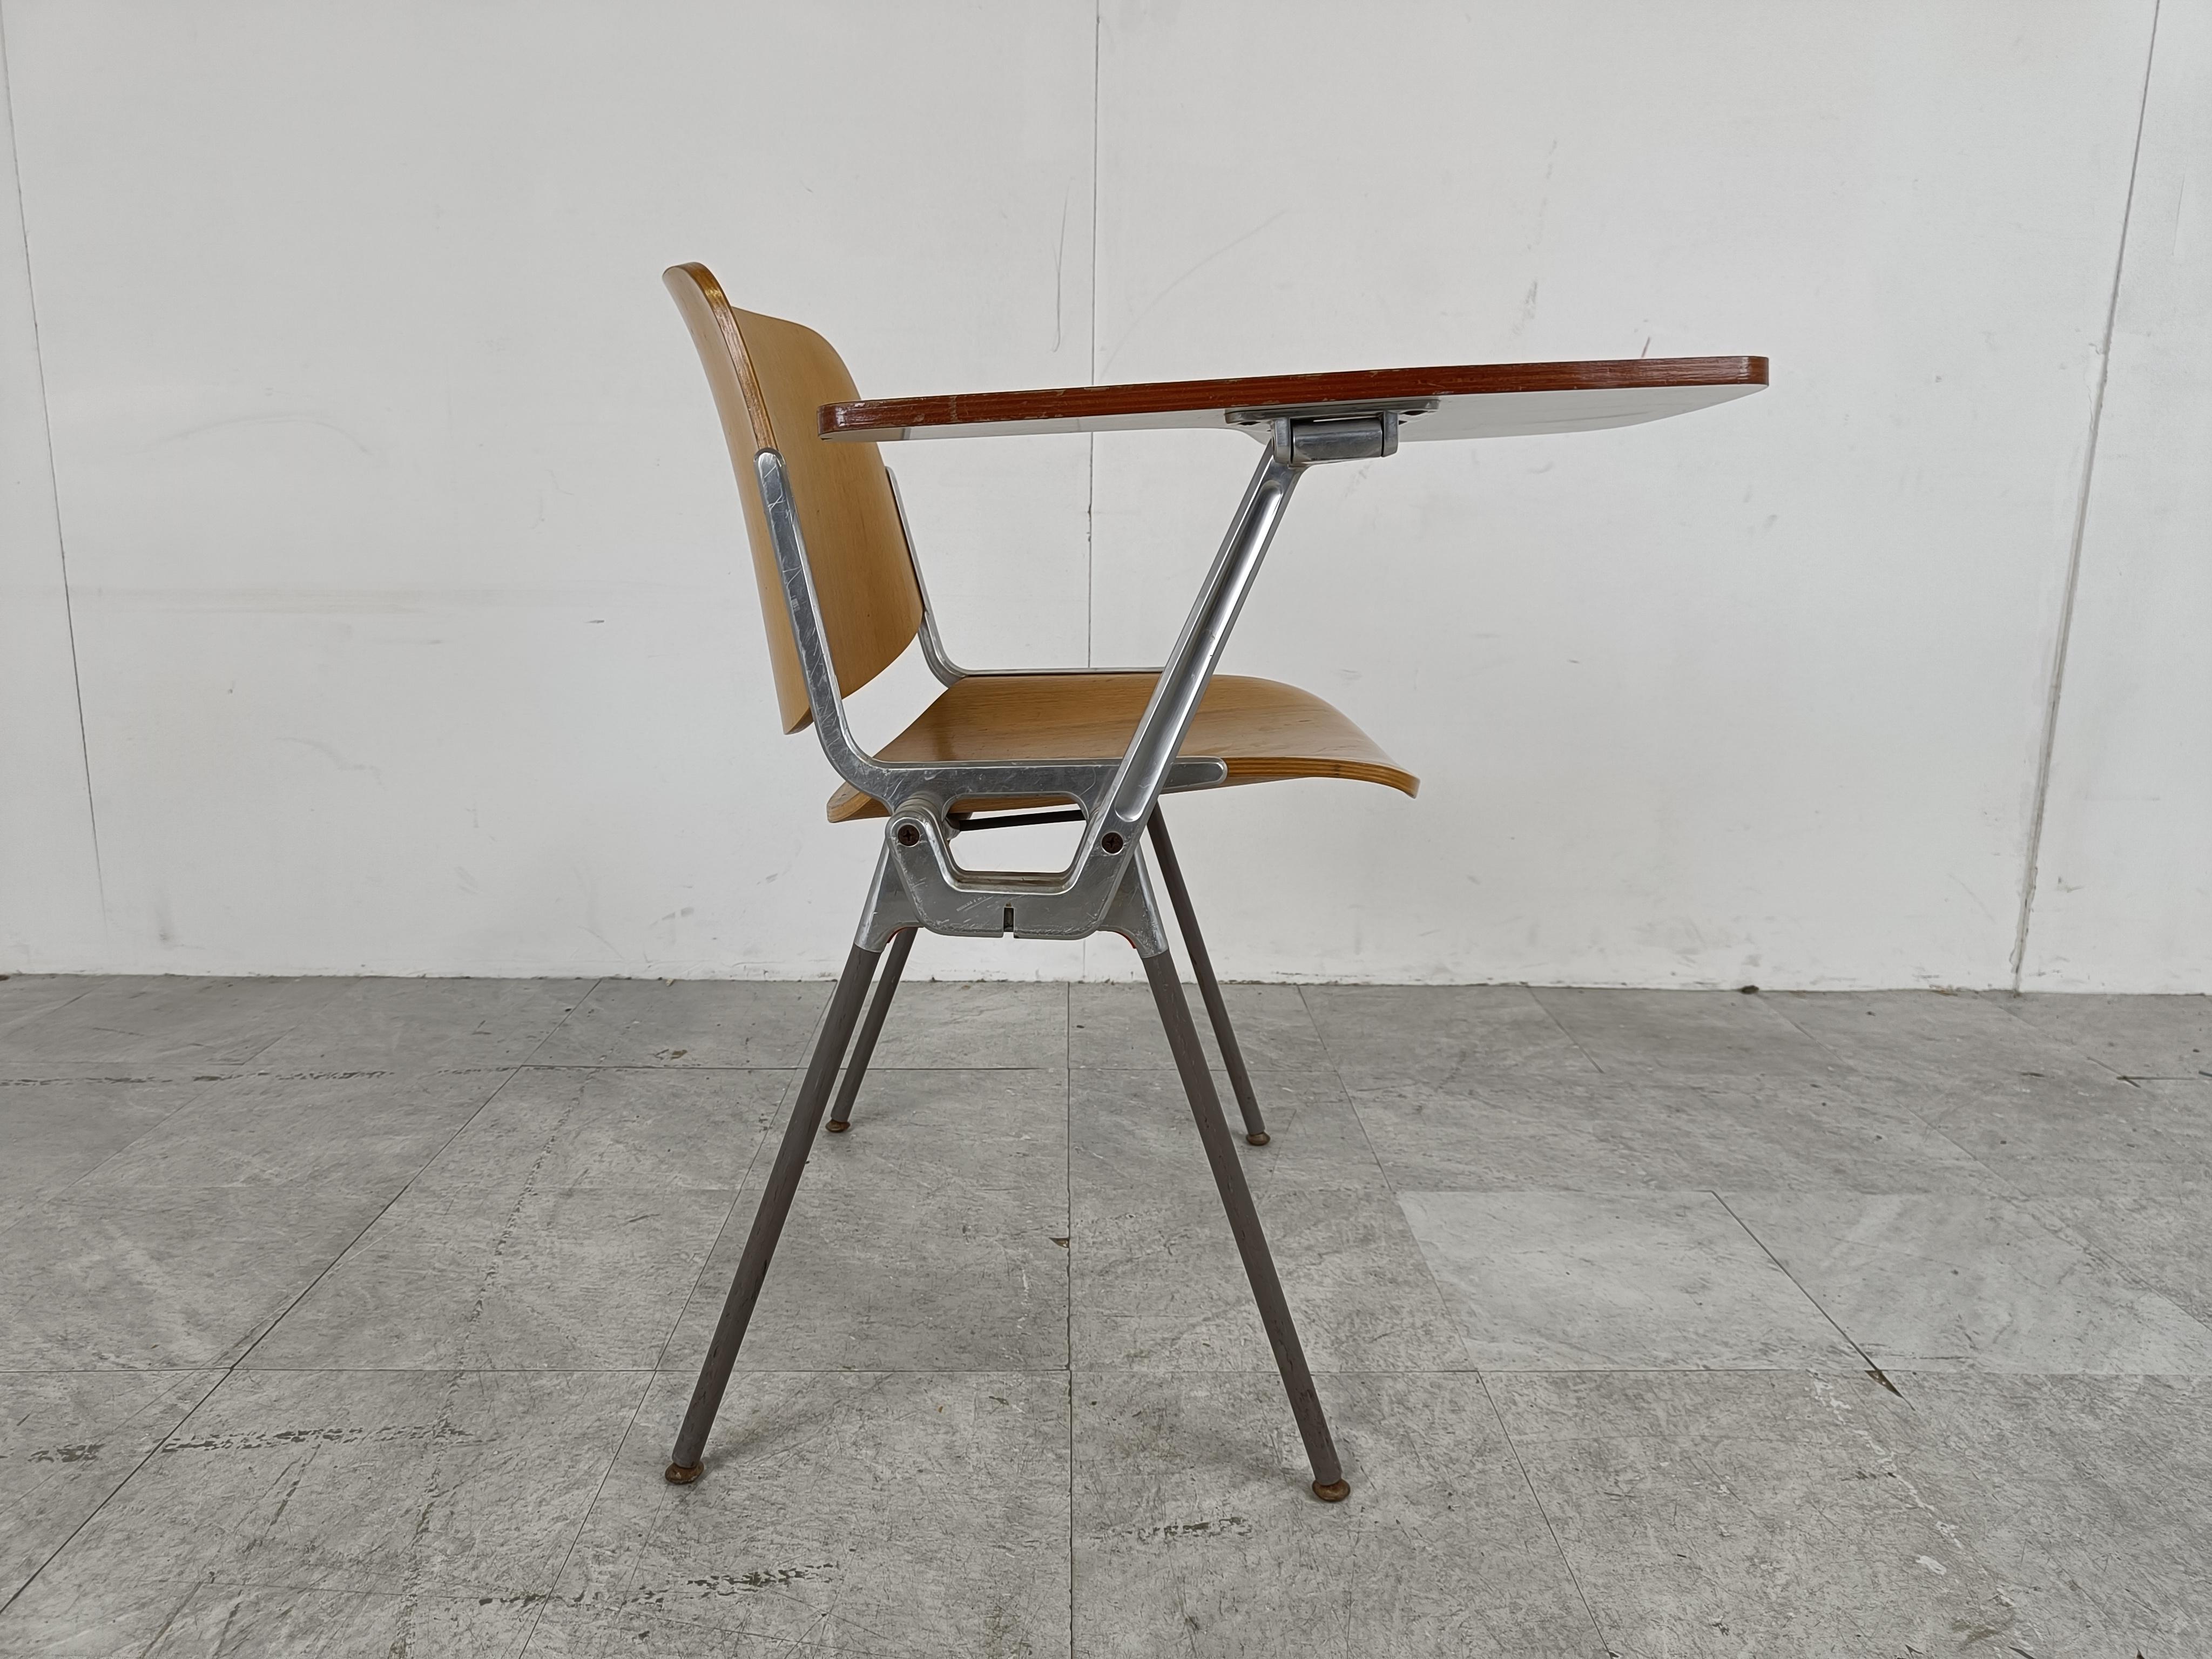 Late 20th Century Vintage Dsc 106 Chair by Giancarlo Piretti for Castelli with Folding Table, 1970 For Sale